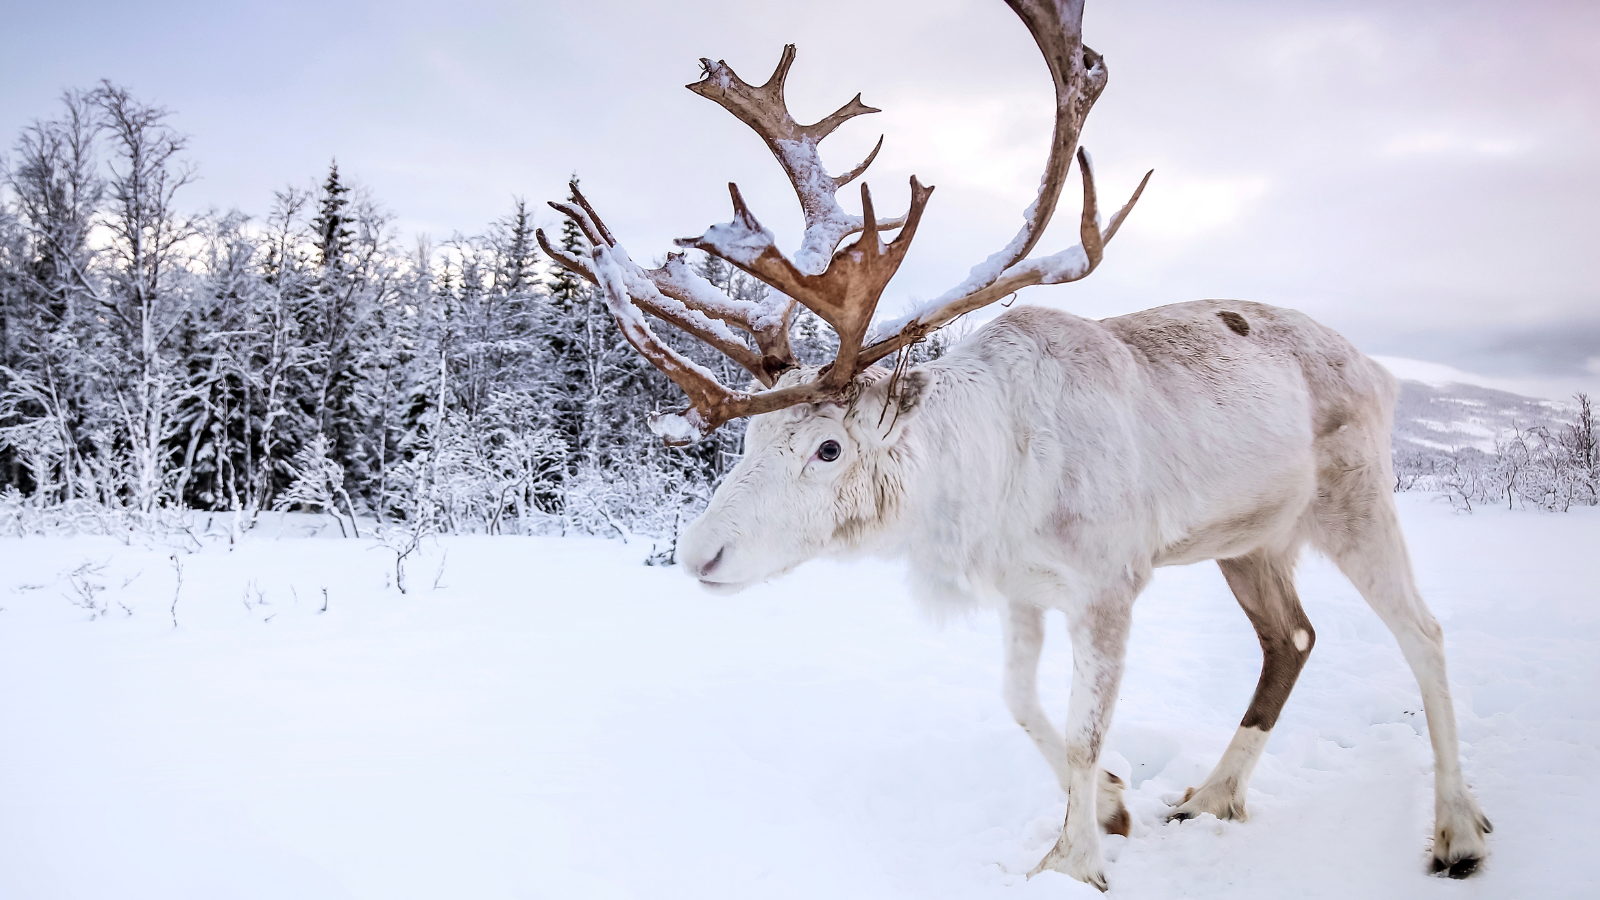 Reindeer, Moose-themed Items - gifts from coach rental in Norway